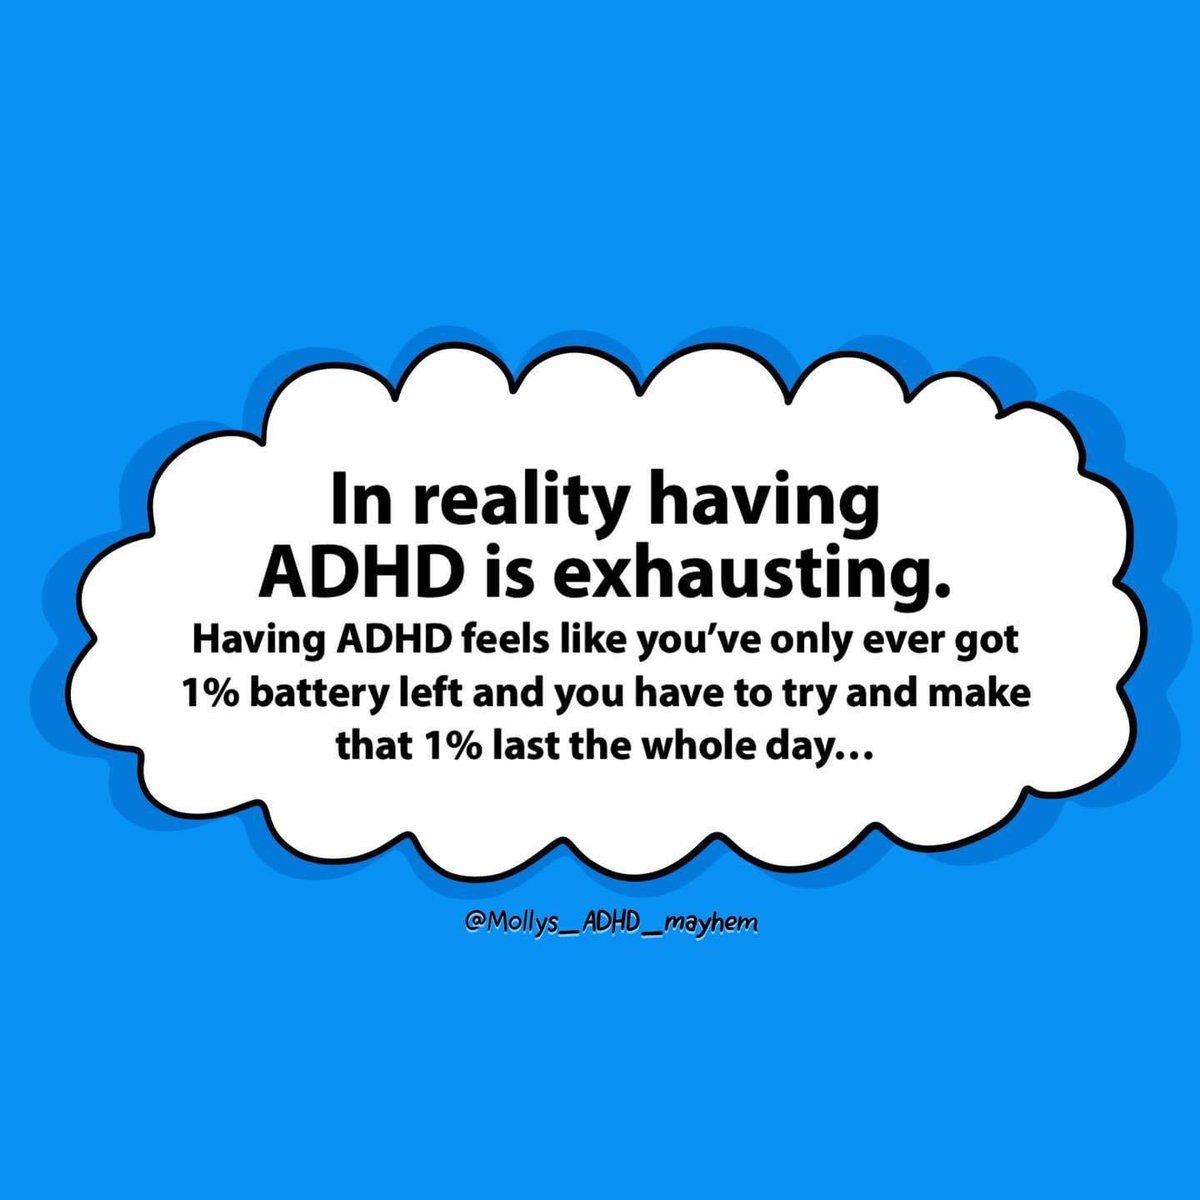 Who else feels this way?

#adhd #adhdawareness #adhdproblems #adhdparenting #adhdparents #adultadhd #adultadhdisreal #adultadhdawareness #womenwithadhd #adhdcoach #adhdcoaching #fatigue #exhausted #burnout #adhdbusinessowner